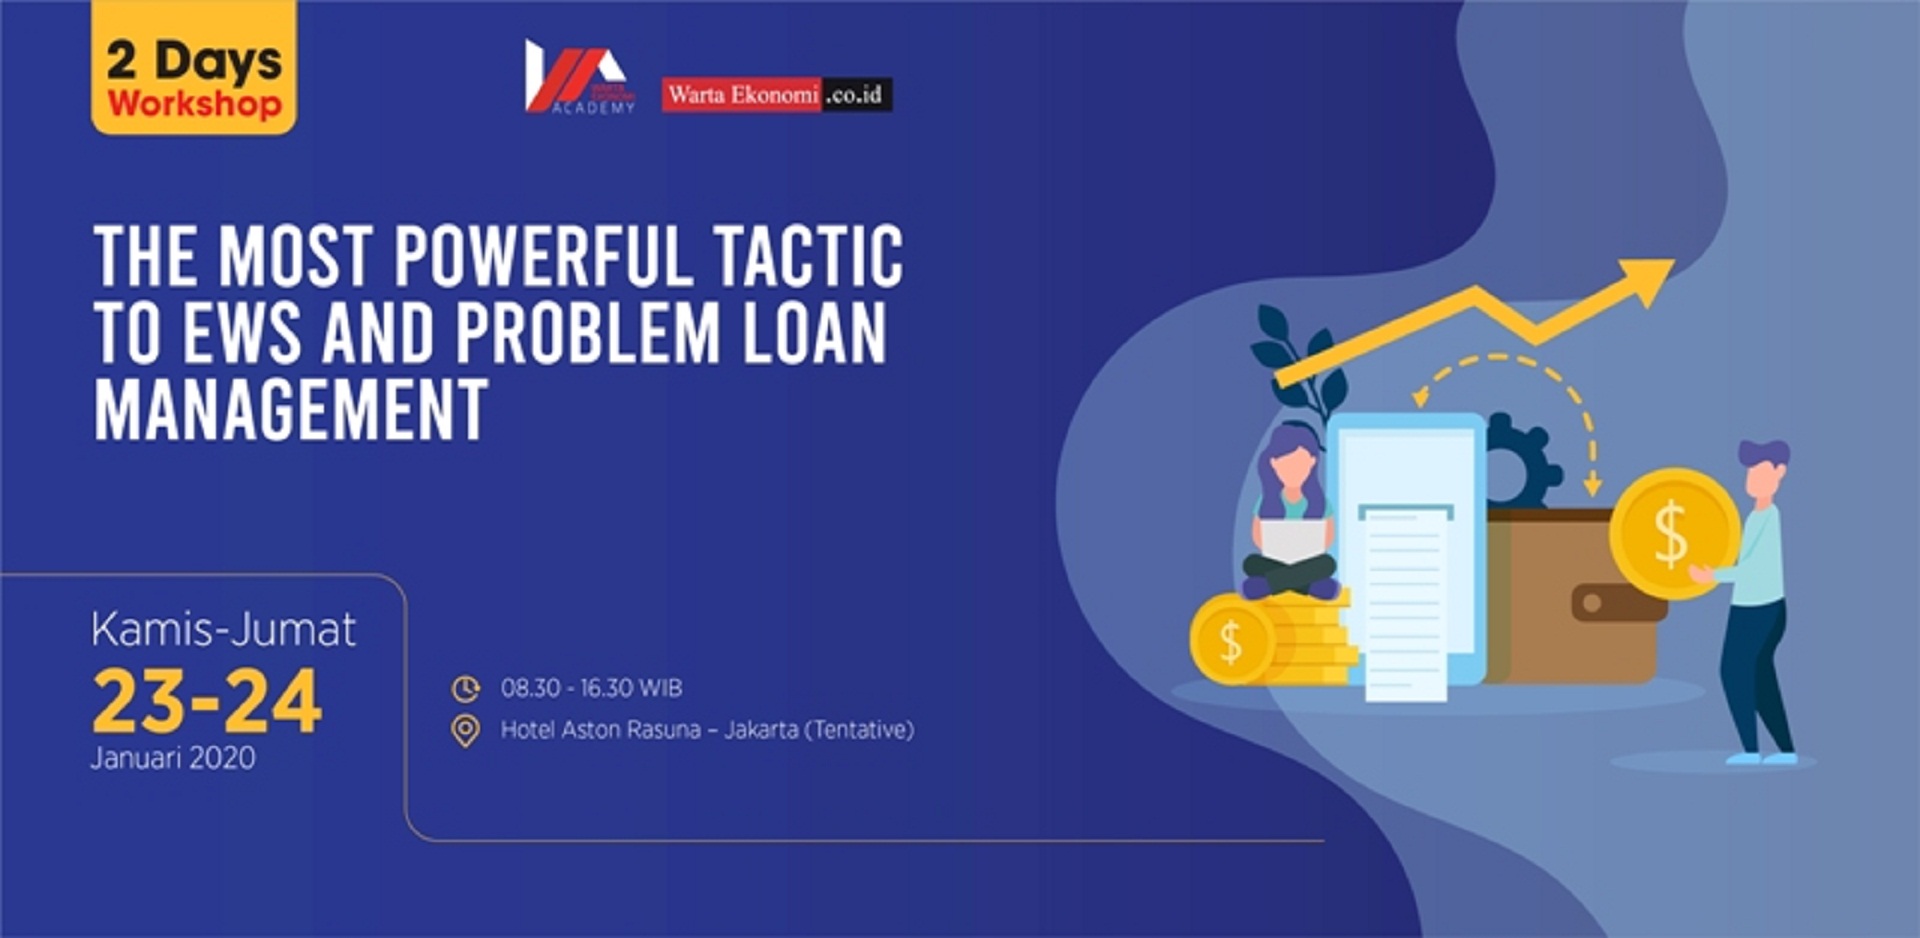 The Most Powerful Tactic to EWS and Problem Loan Management